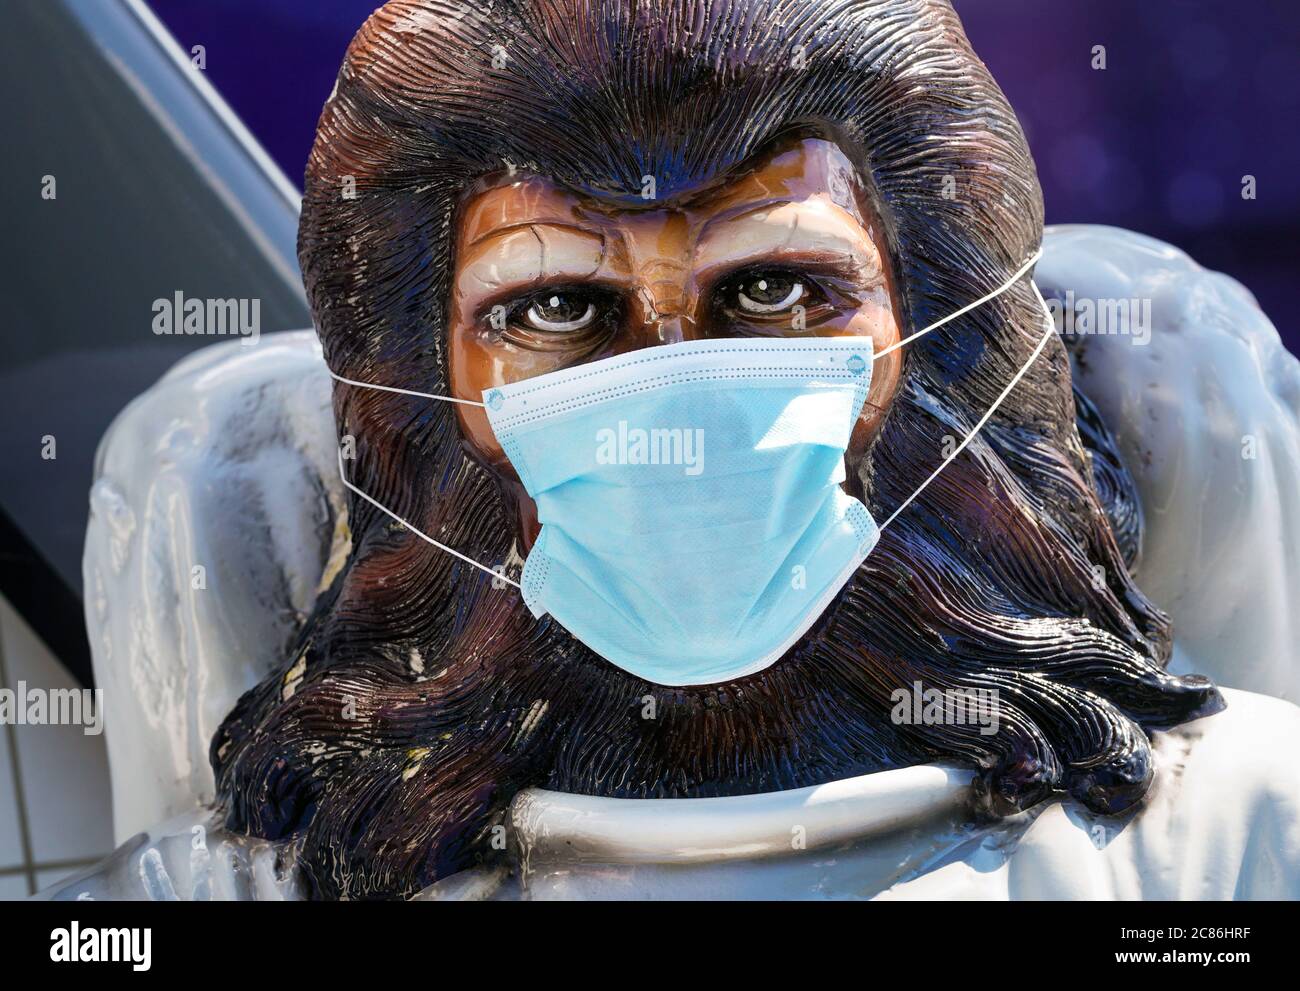 Dortmund, Germany, July 21, 2020: Figure from Star Wars Movie with face mask at the temporary pop-up amusement park 'funDOmio'. Opened on June 25, 2020 at the exhibition center around Dortmund's Westfalenhalle. The showmen want to compensate a little for the bitter losses caused by the corona-related closings of the fairs. The amusement park is open until August 11th, 2020. Stock Photo